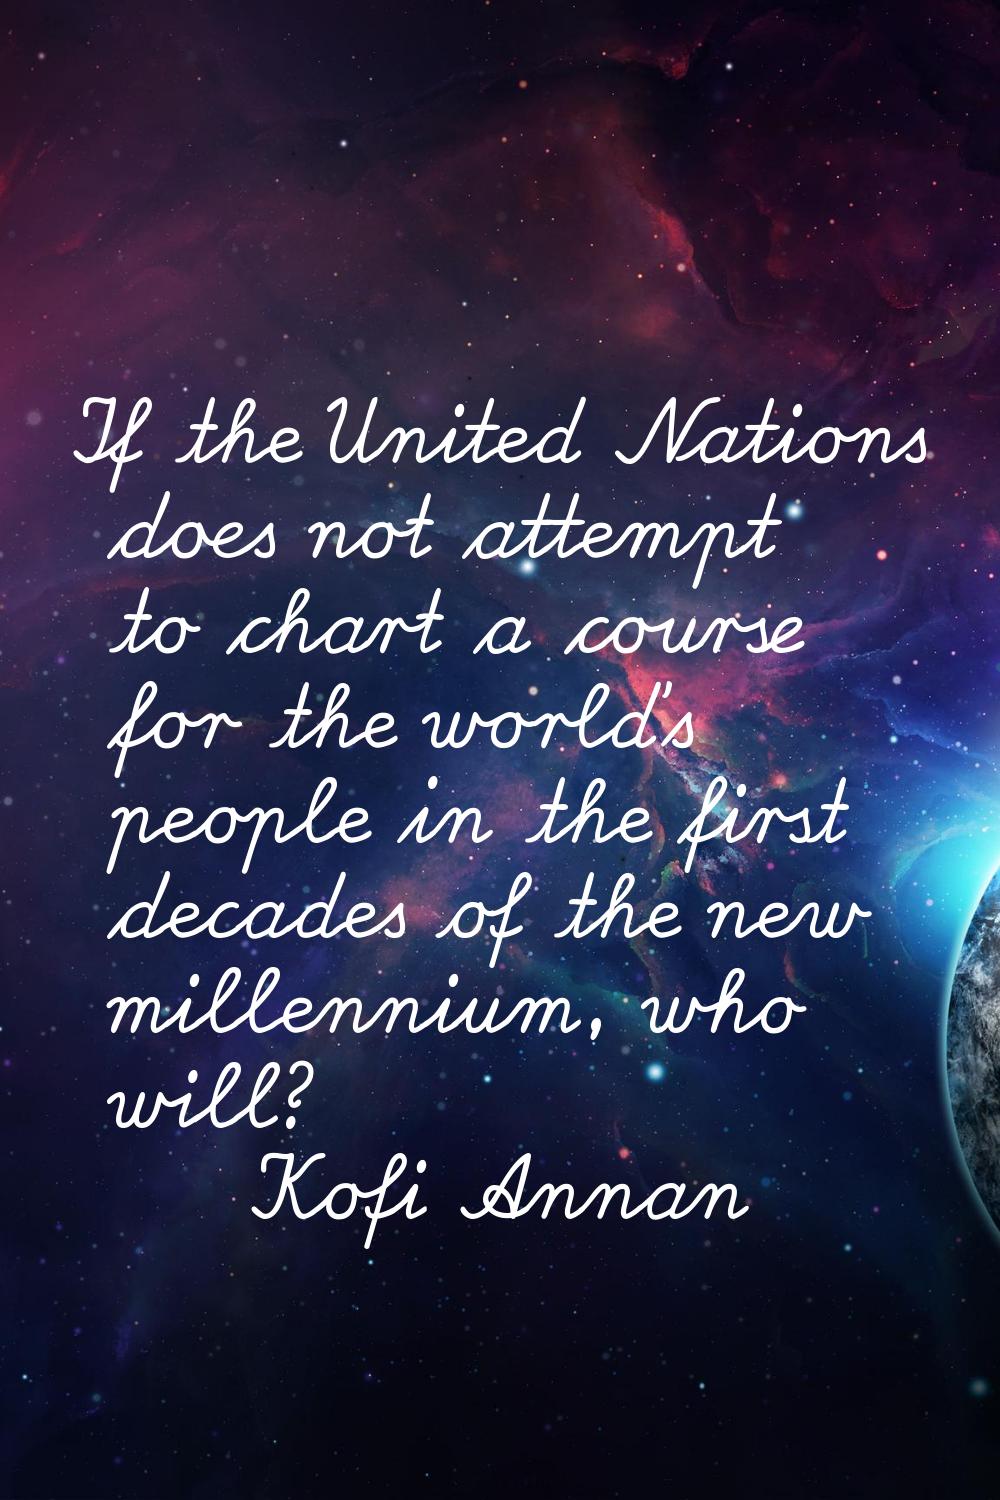 If the United Nations does not attempt to chart a course for the world's people in the first decade